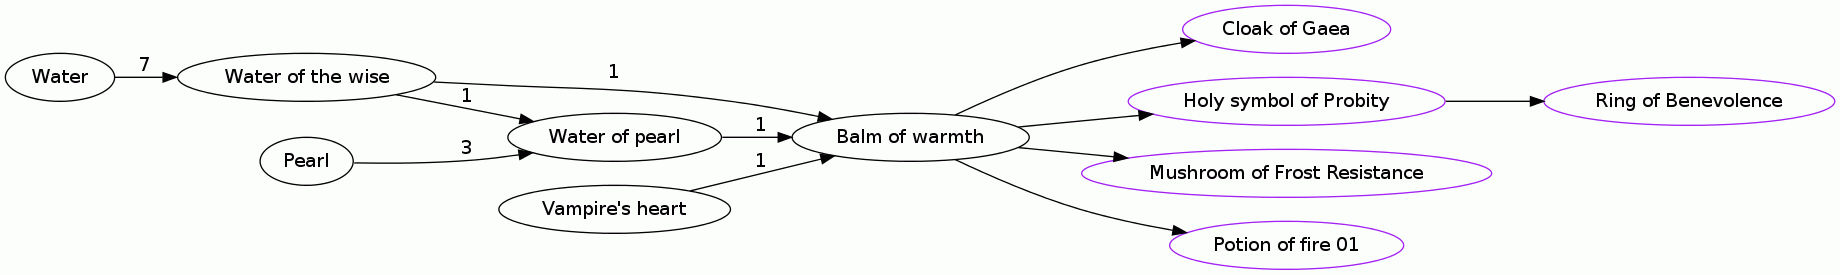 Balm of warmth